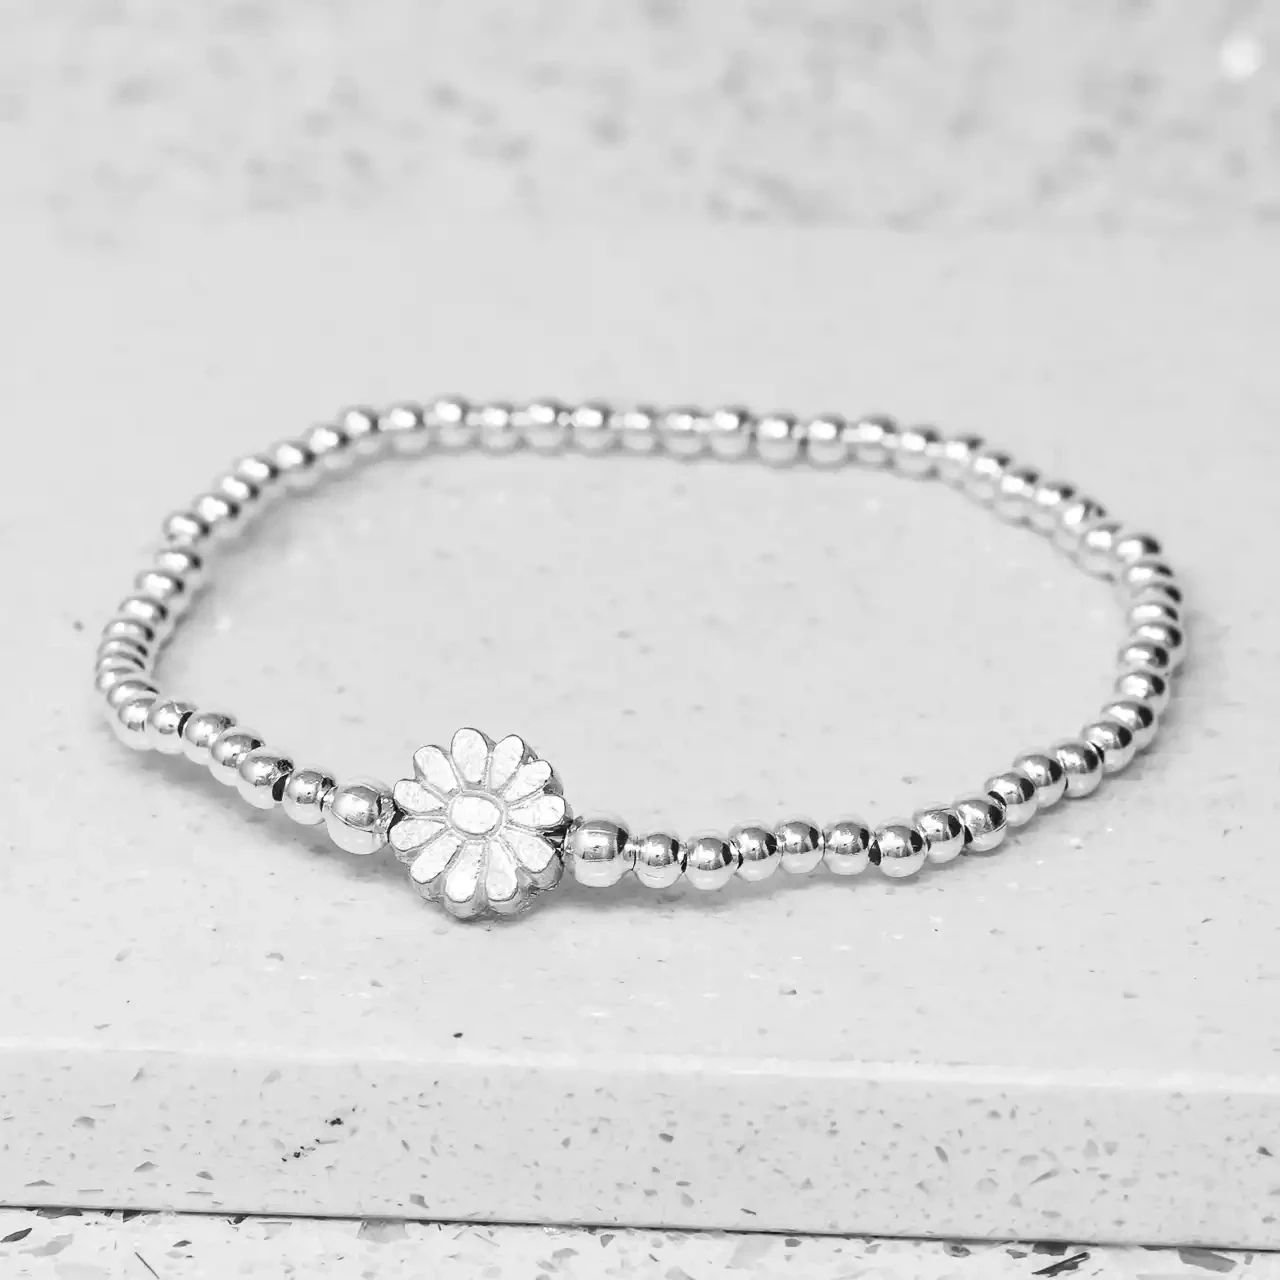 Seed Bead Bracelet With Pewter Daisy Charm - Thinking of You by Metal Planet